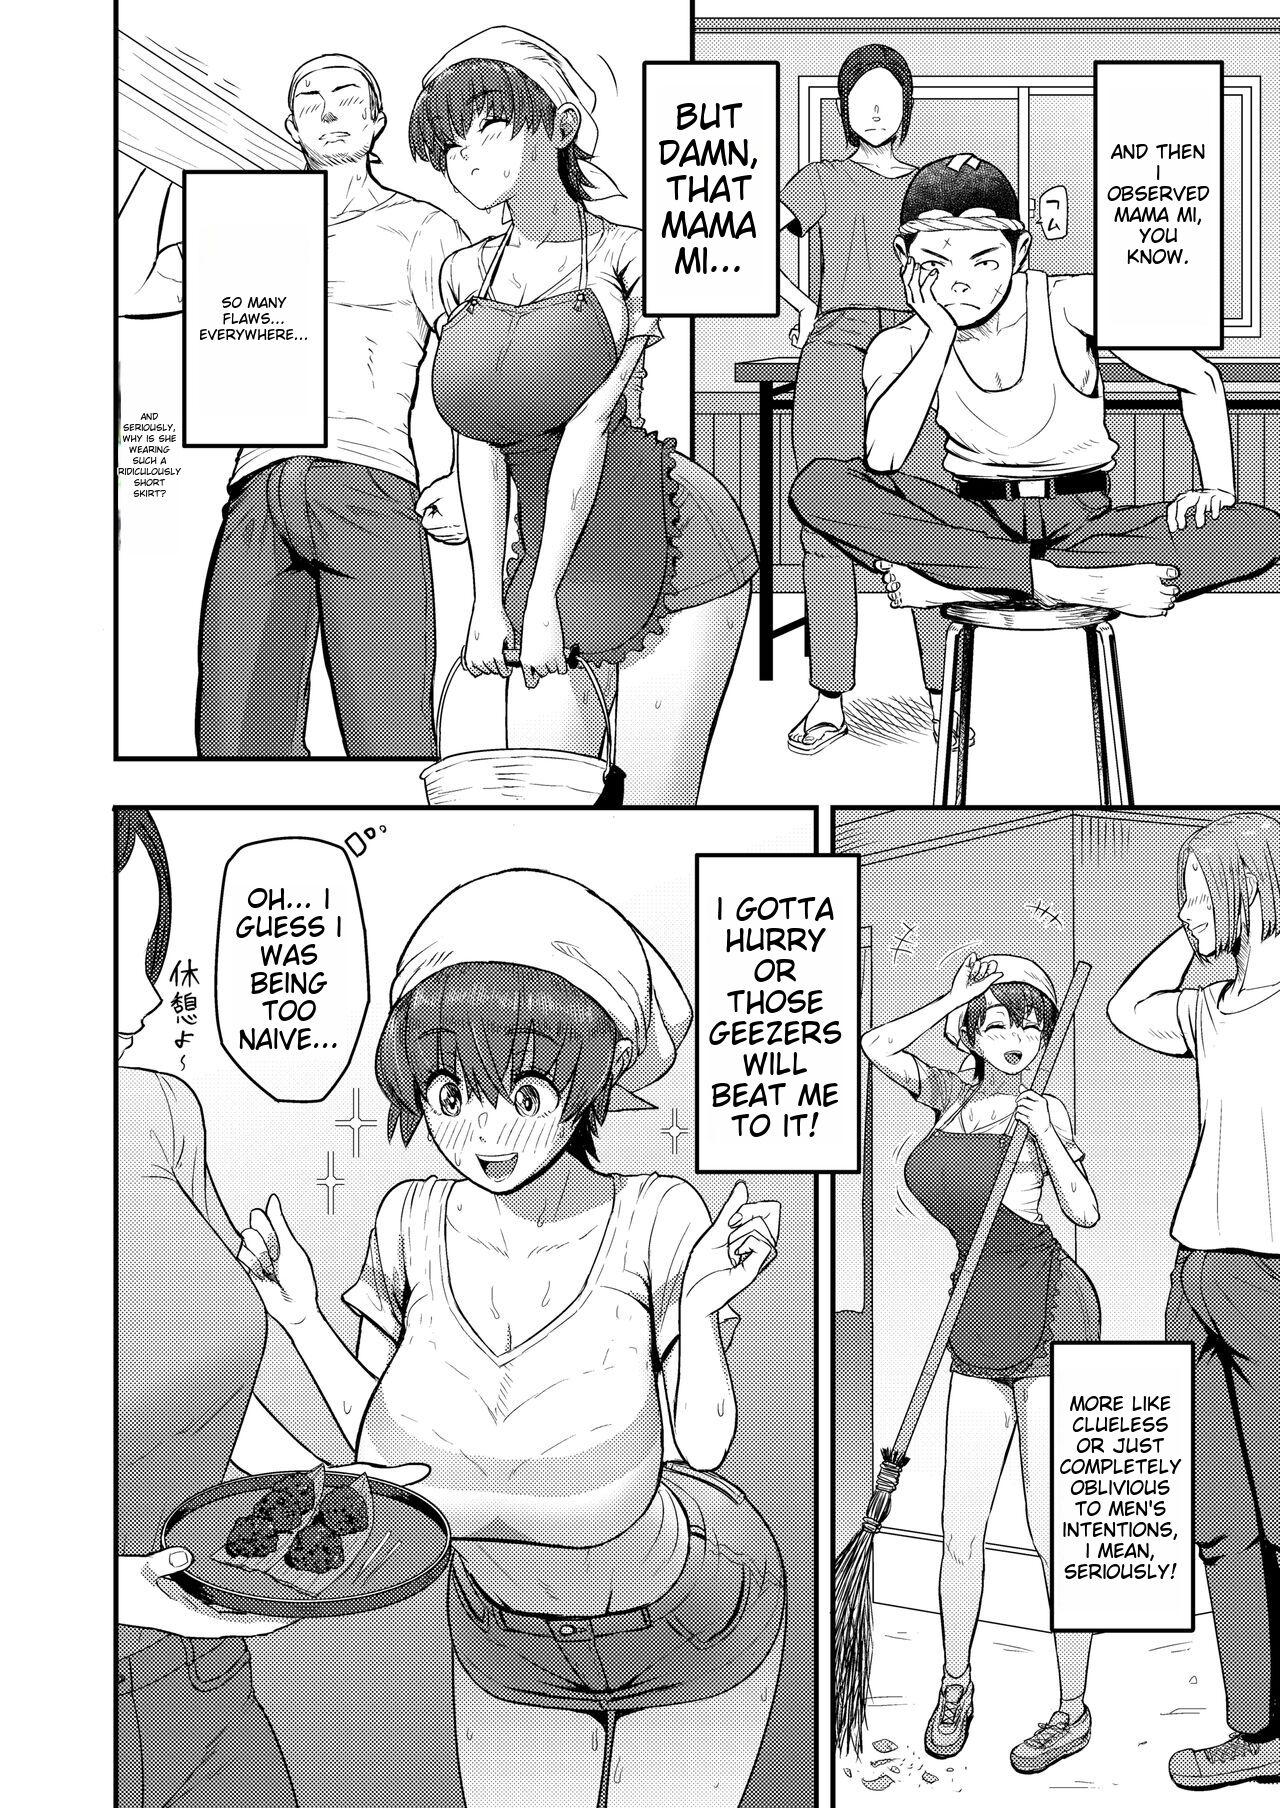 Family Mamami no Kuse ni! | Even In The Countryside, Being Busty Is Not A Problem, I Tell Ya! Yanks Featured - Page 6